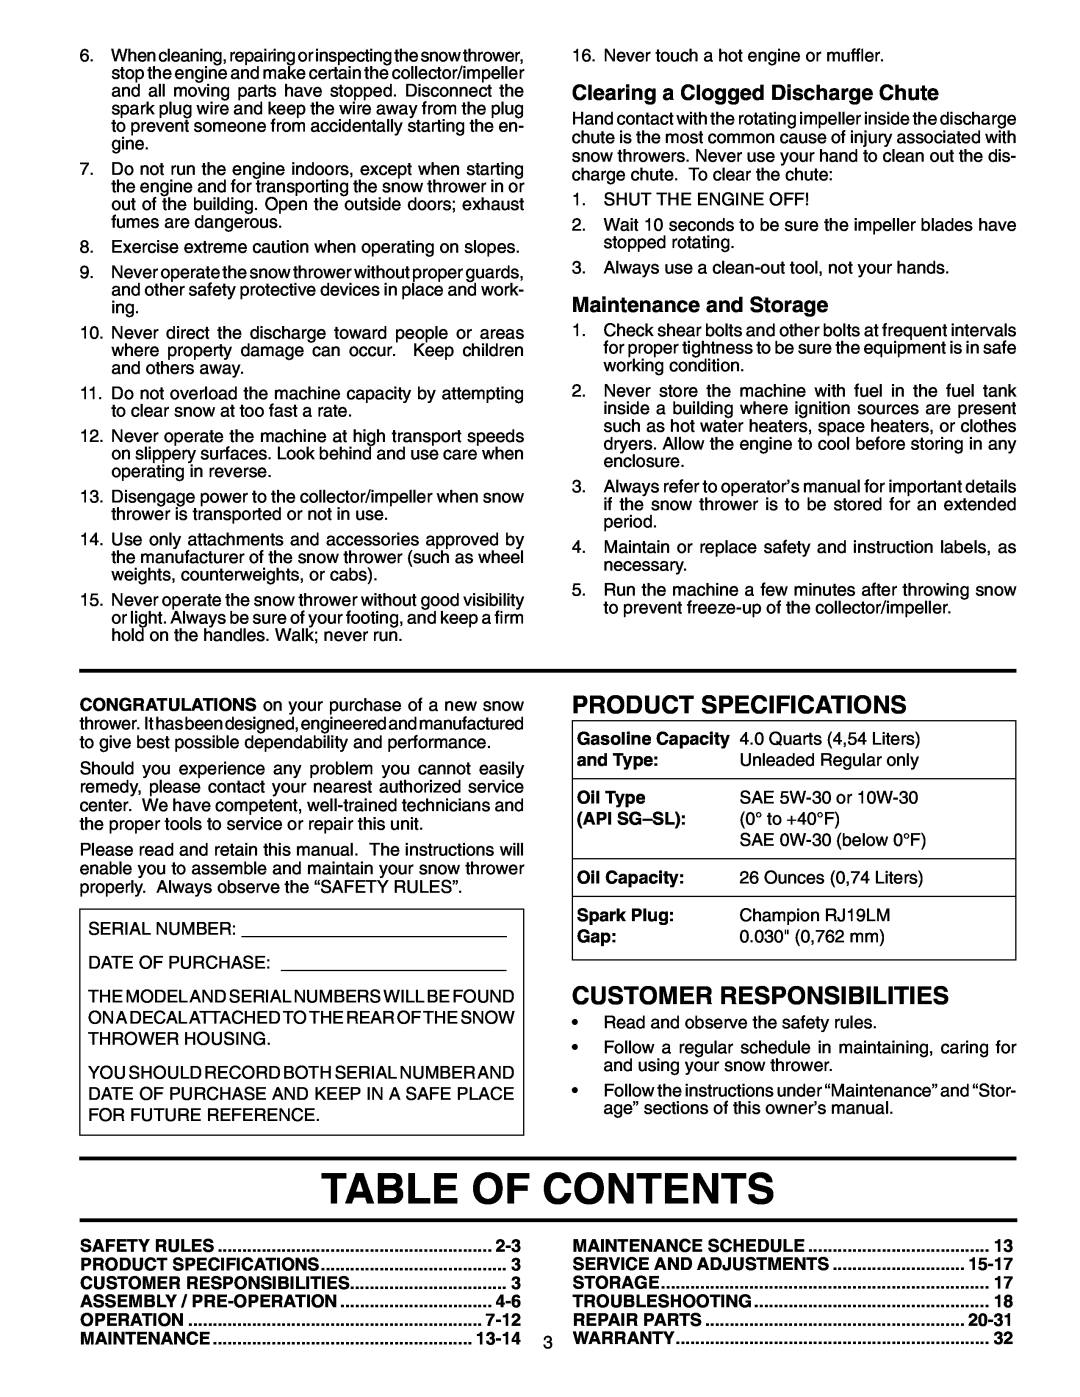 Poulan PR8527ES Table Of Contents, Clearing a Clogged Discharge Chute, Maintenance and Storage, Product Specifications 